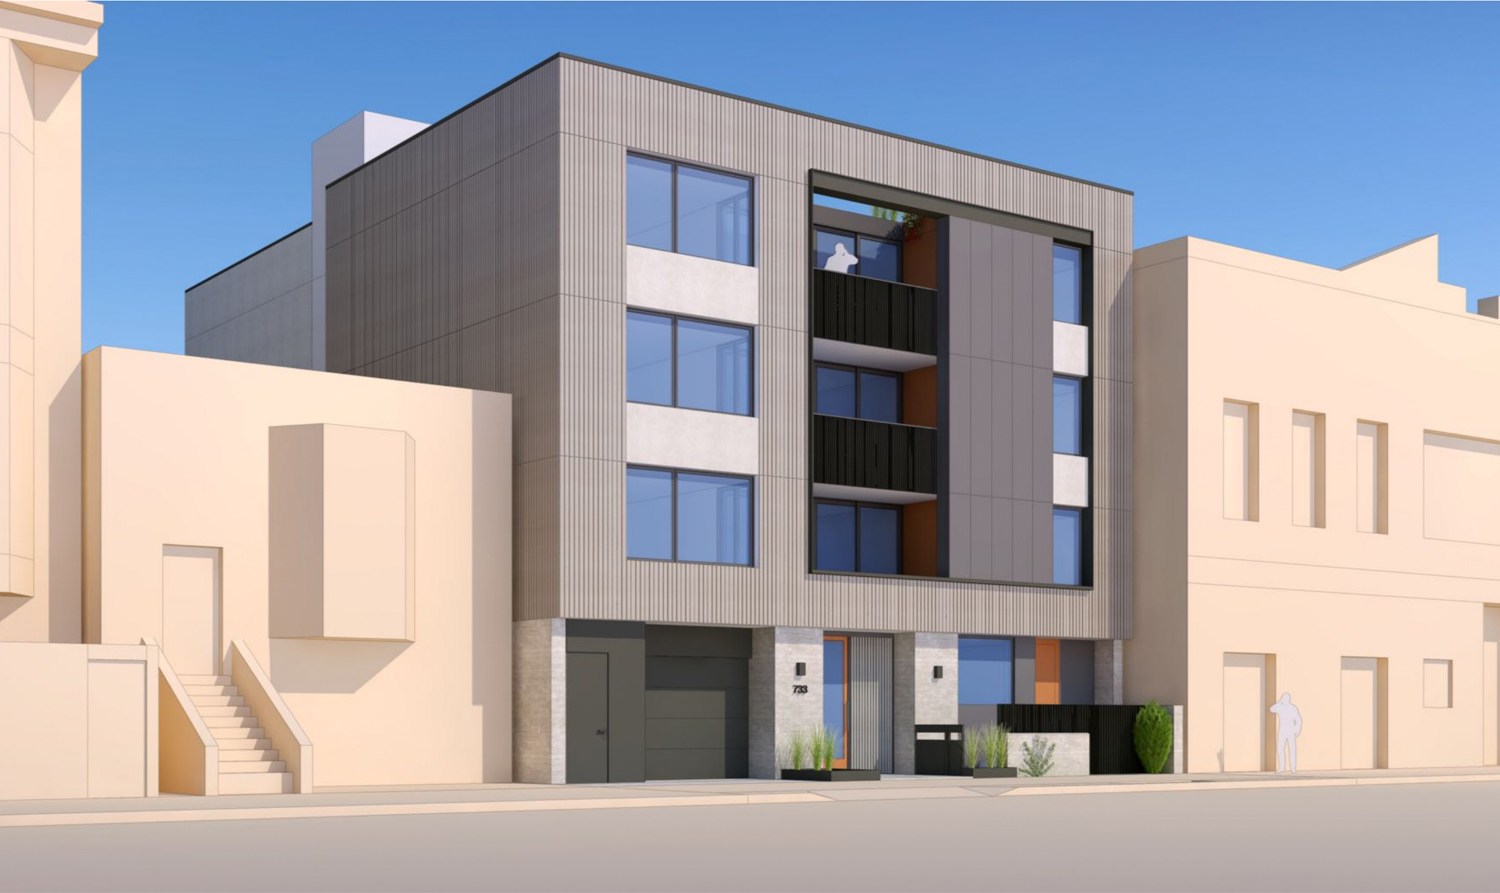 Older more modernist design of 733 Treat Avenue, rendering by SIA Consulting